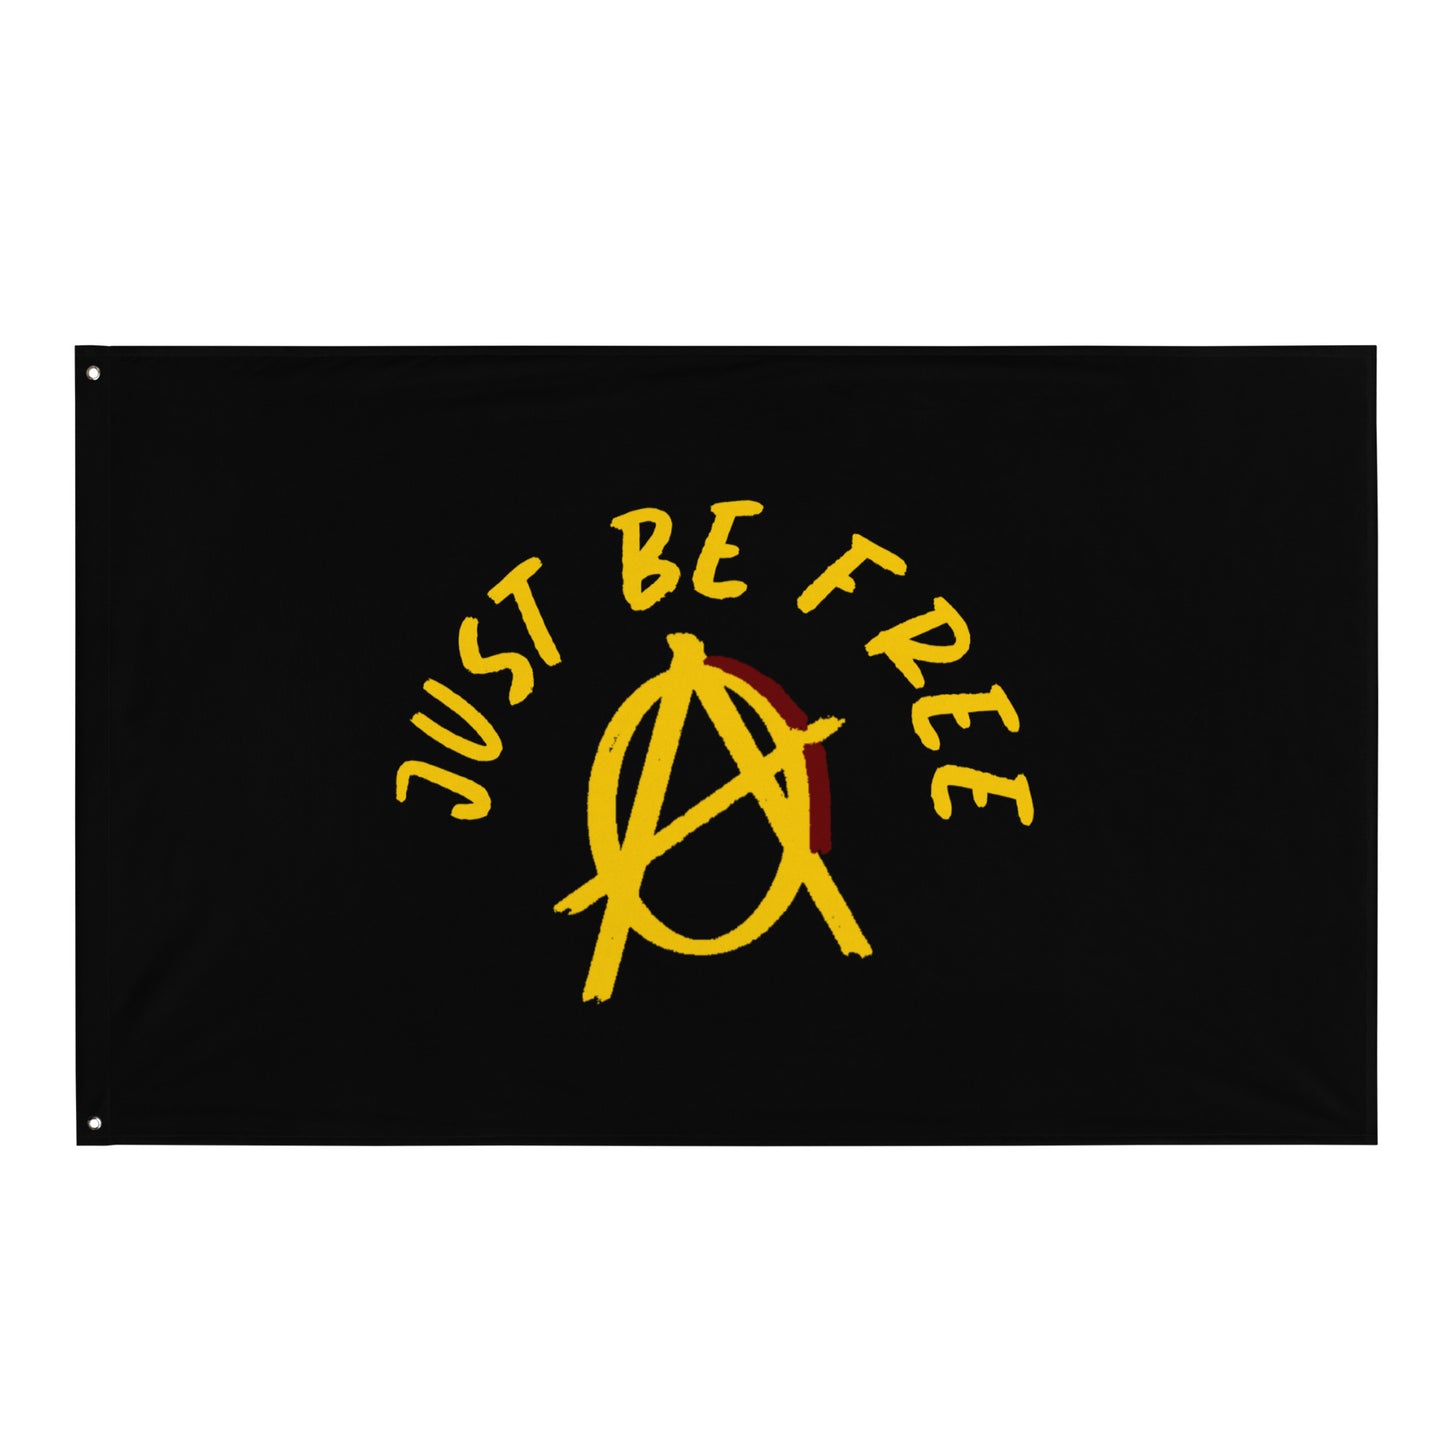 Anarchy Wear "Just Be Free" Flag